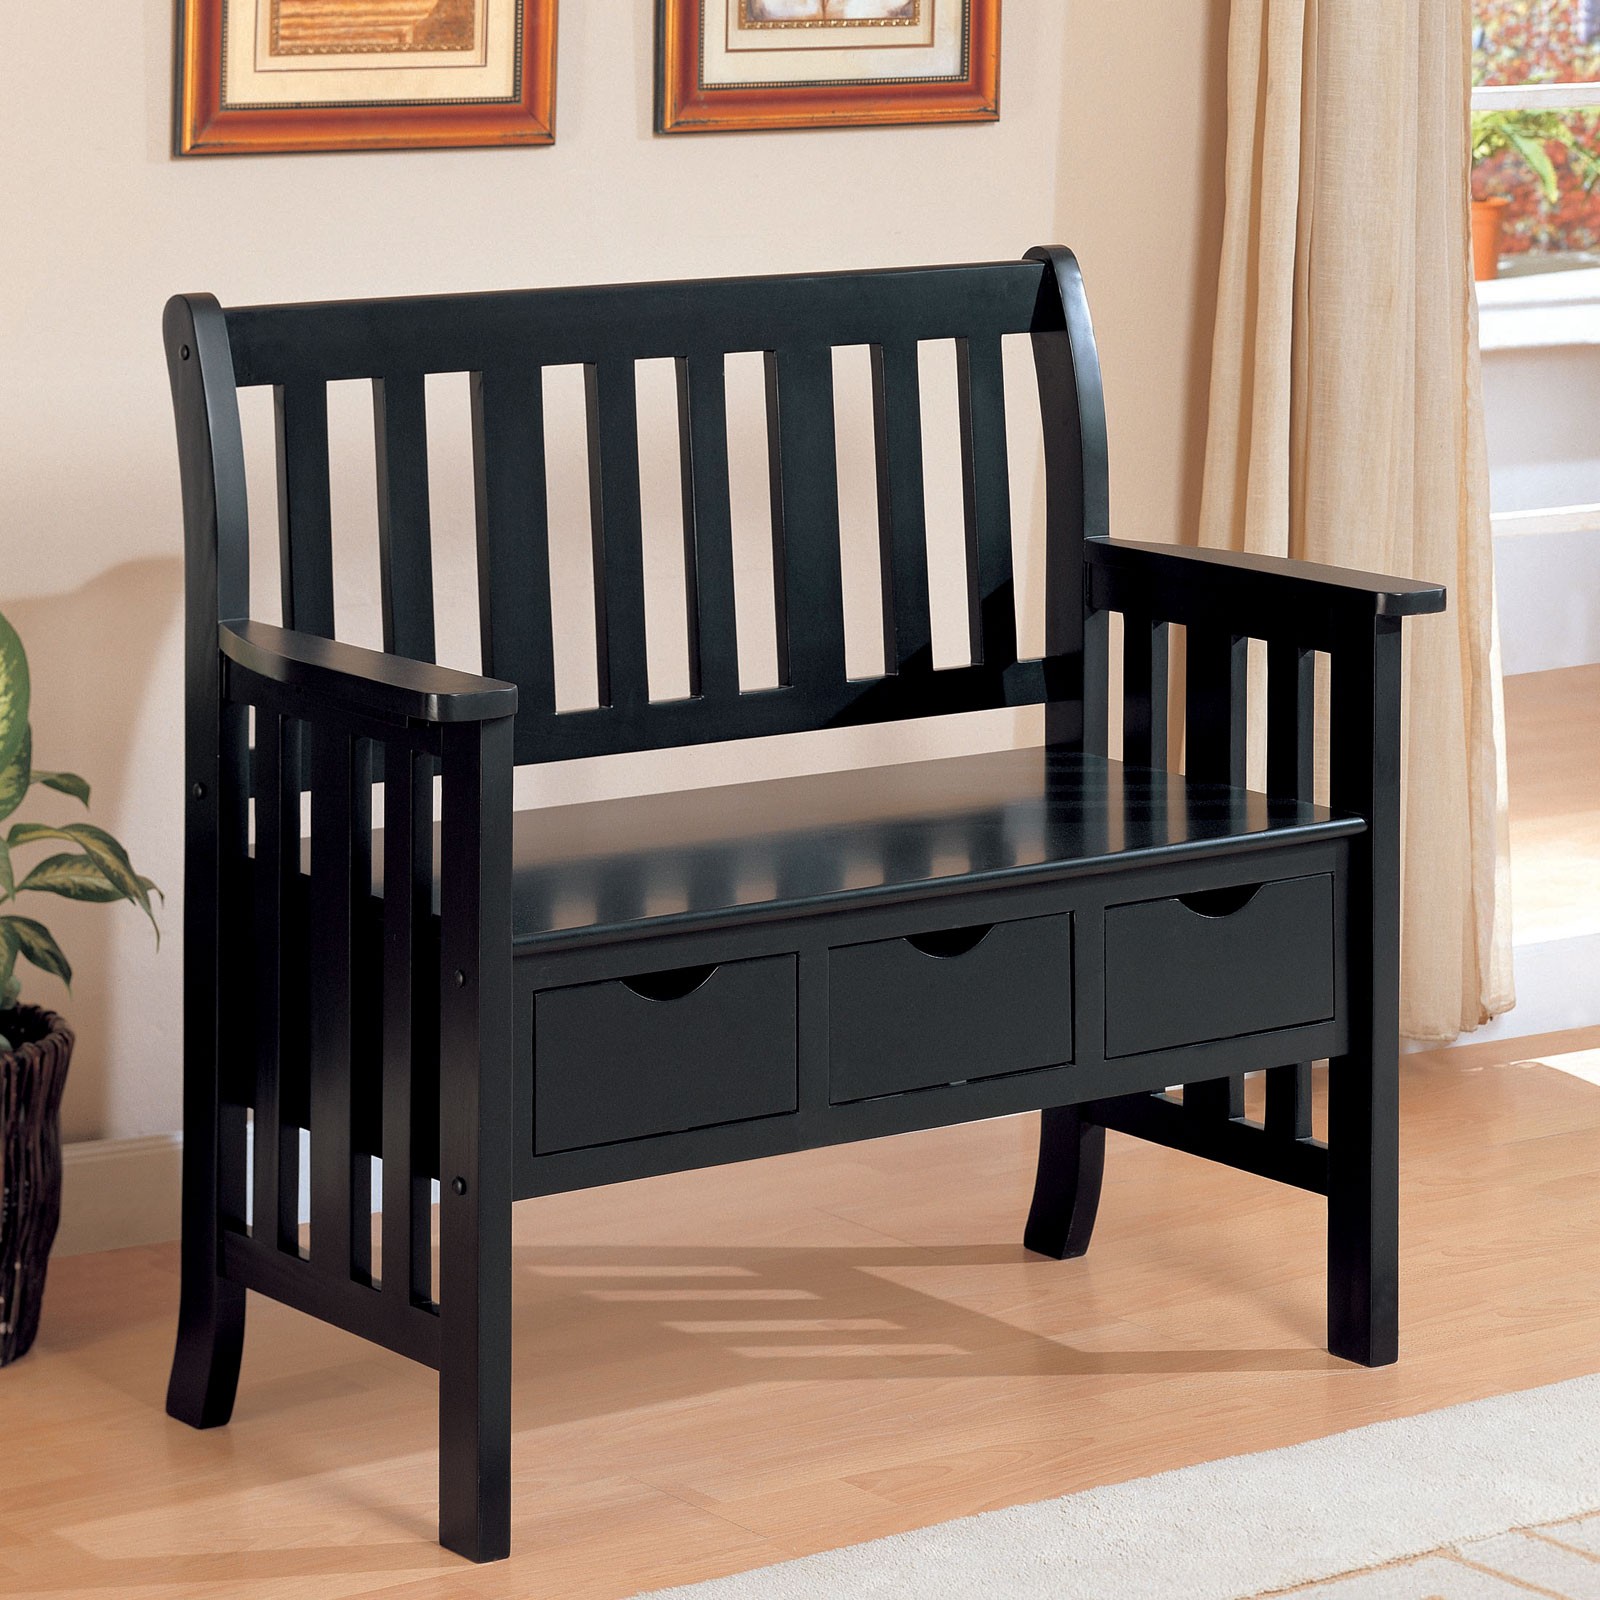 Coaster Cottage Style Wooden Chair Bench with Storage Drawer, Black